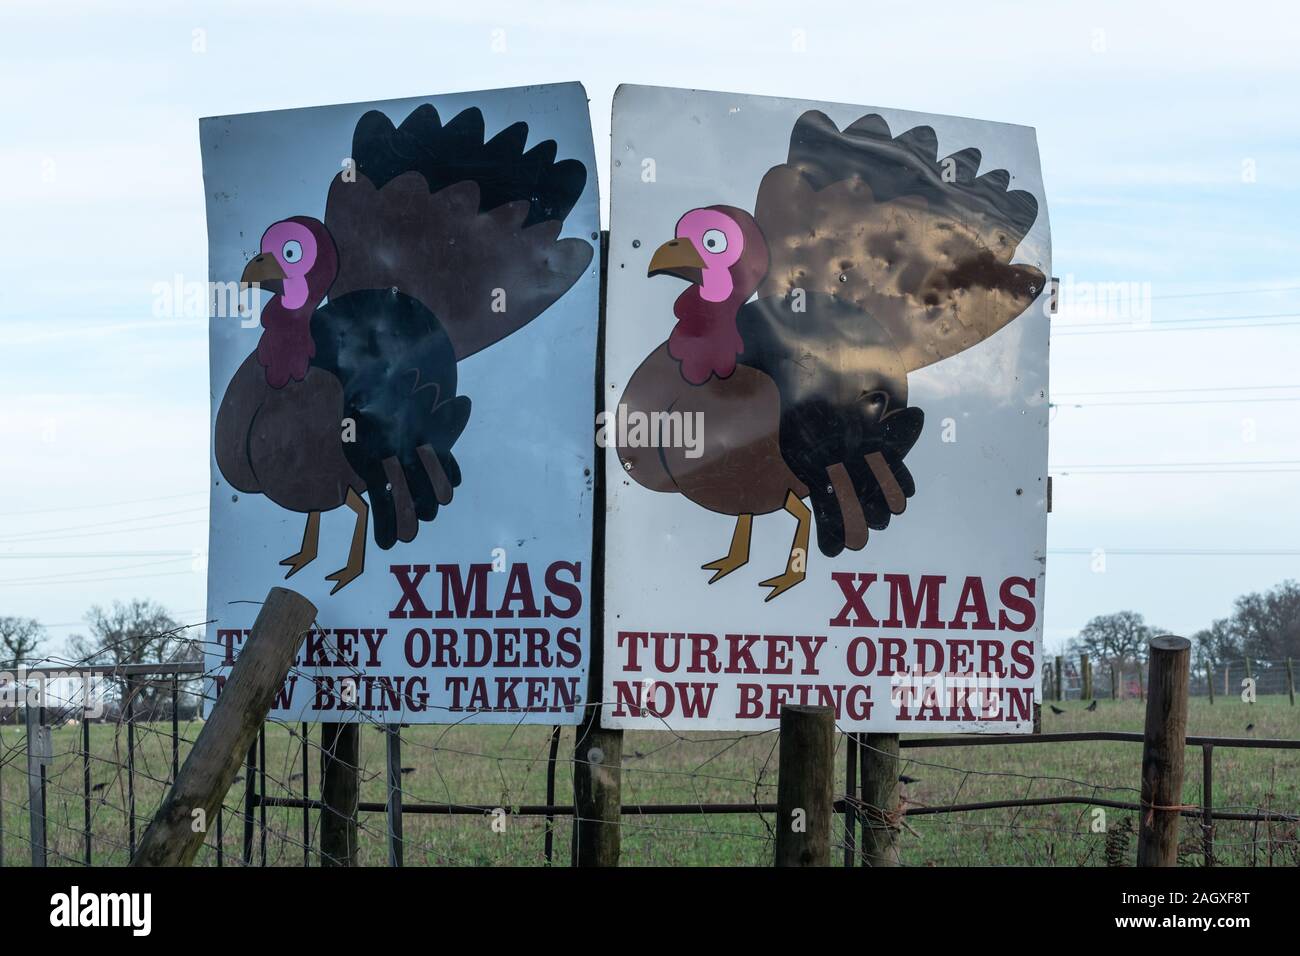 Signs advertising Christmas turkeys for order (for sale) at a UK farm Stock Photo